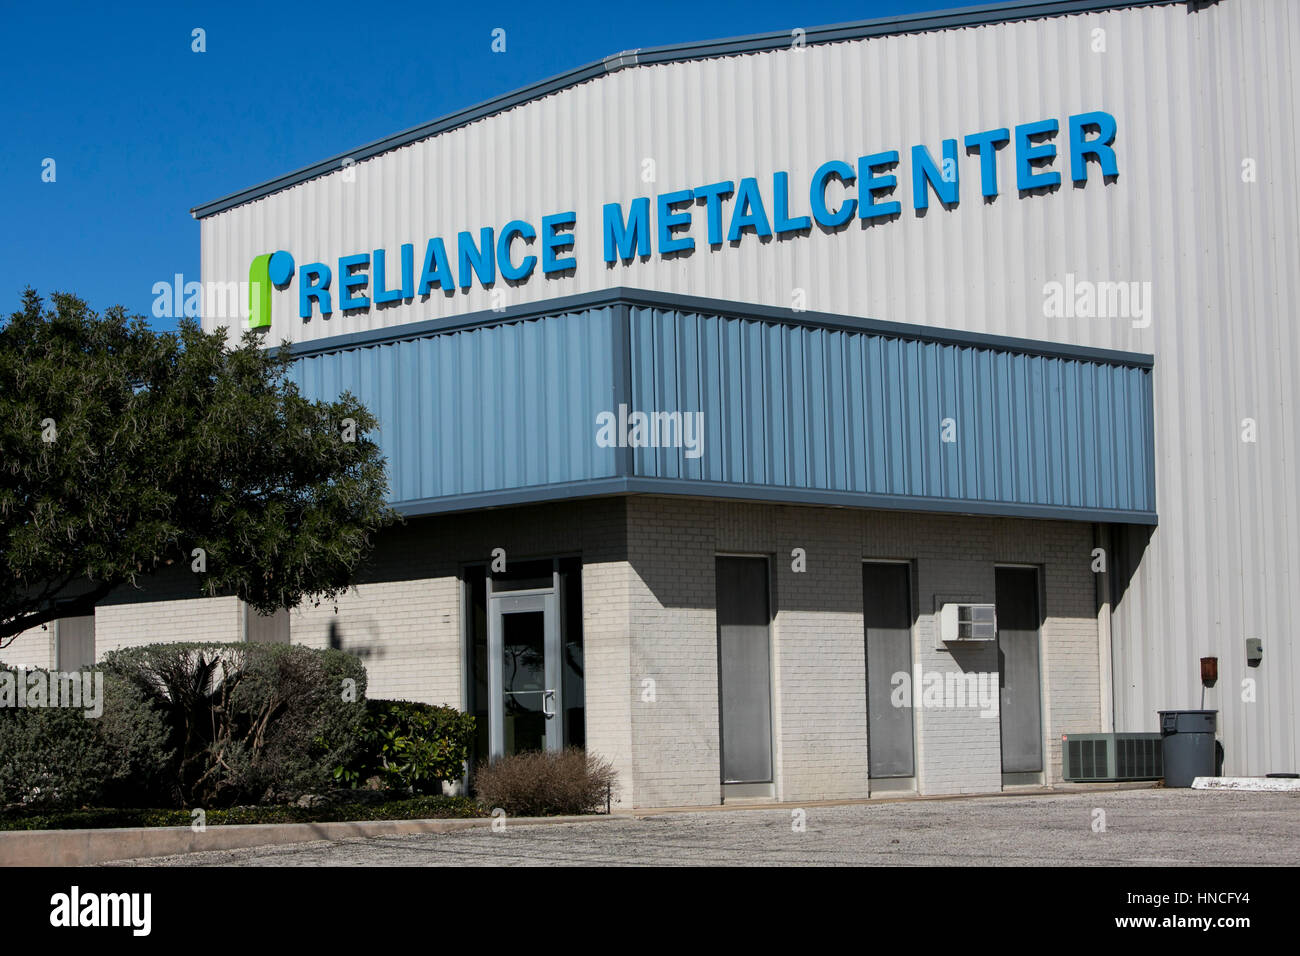 A logo sign outside of a Reliance Metacenter in San Antonio, Texas on January 29, 2017. Stock Photo